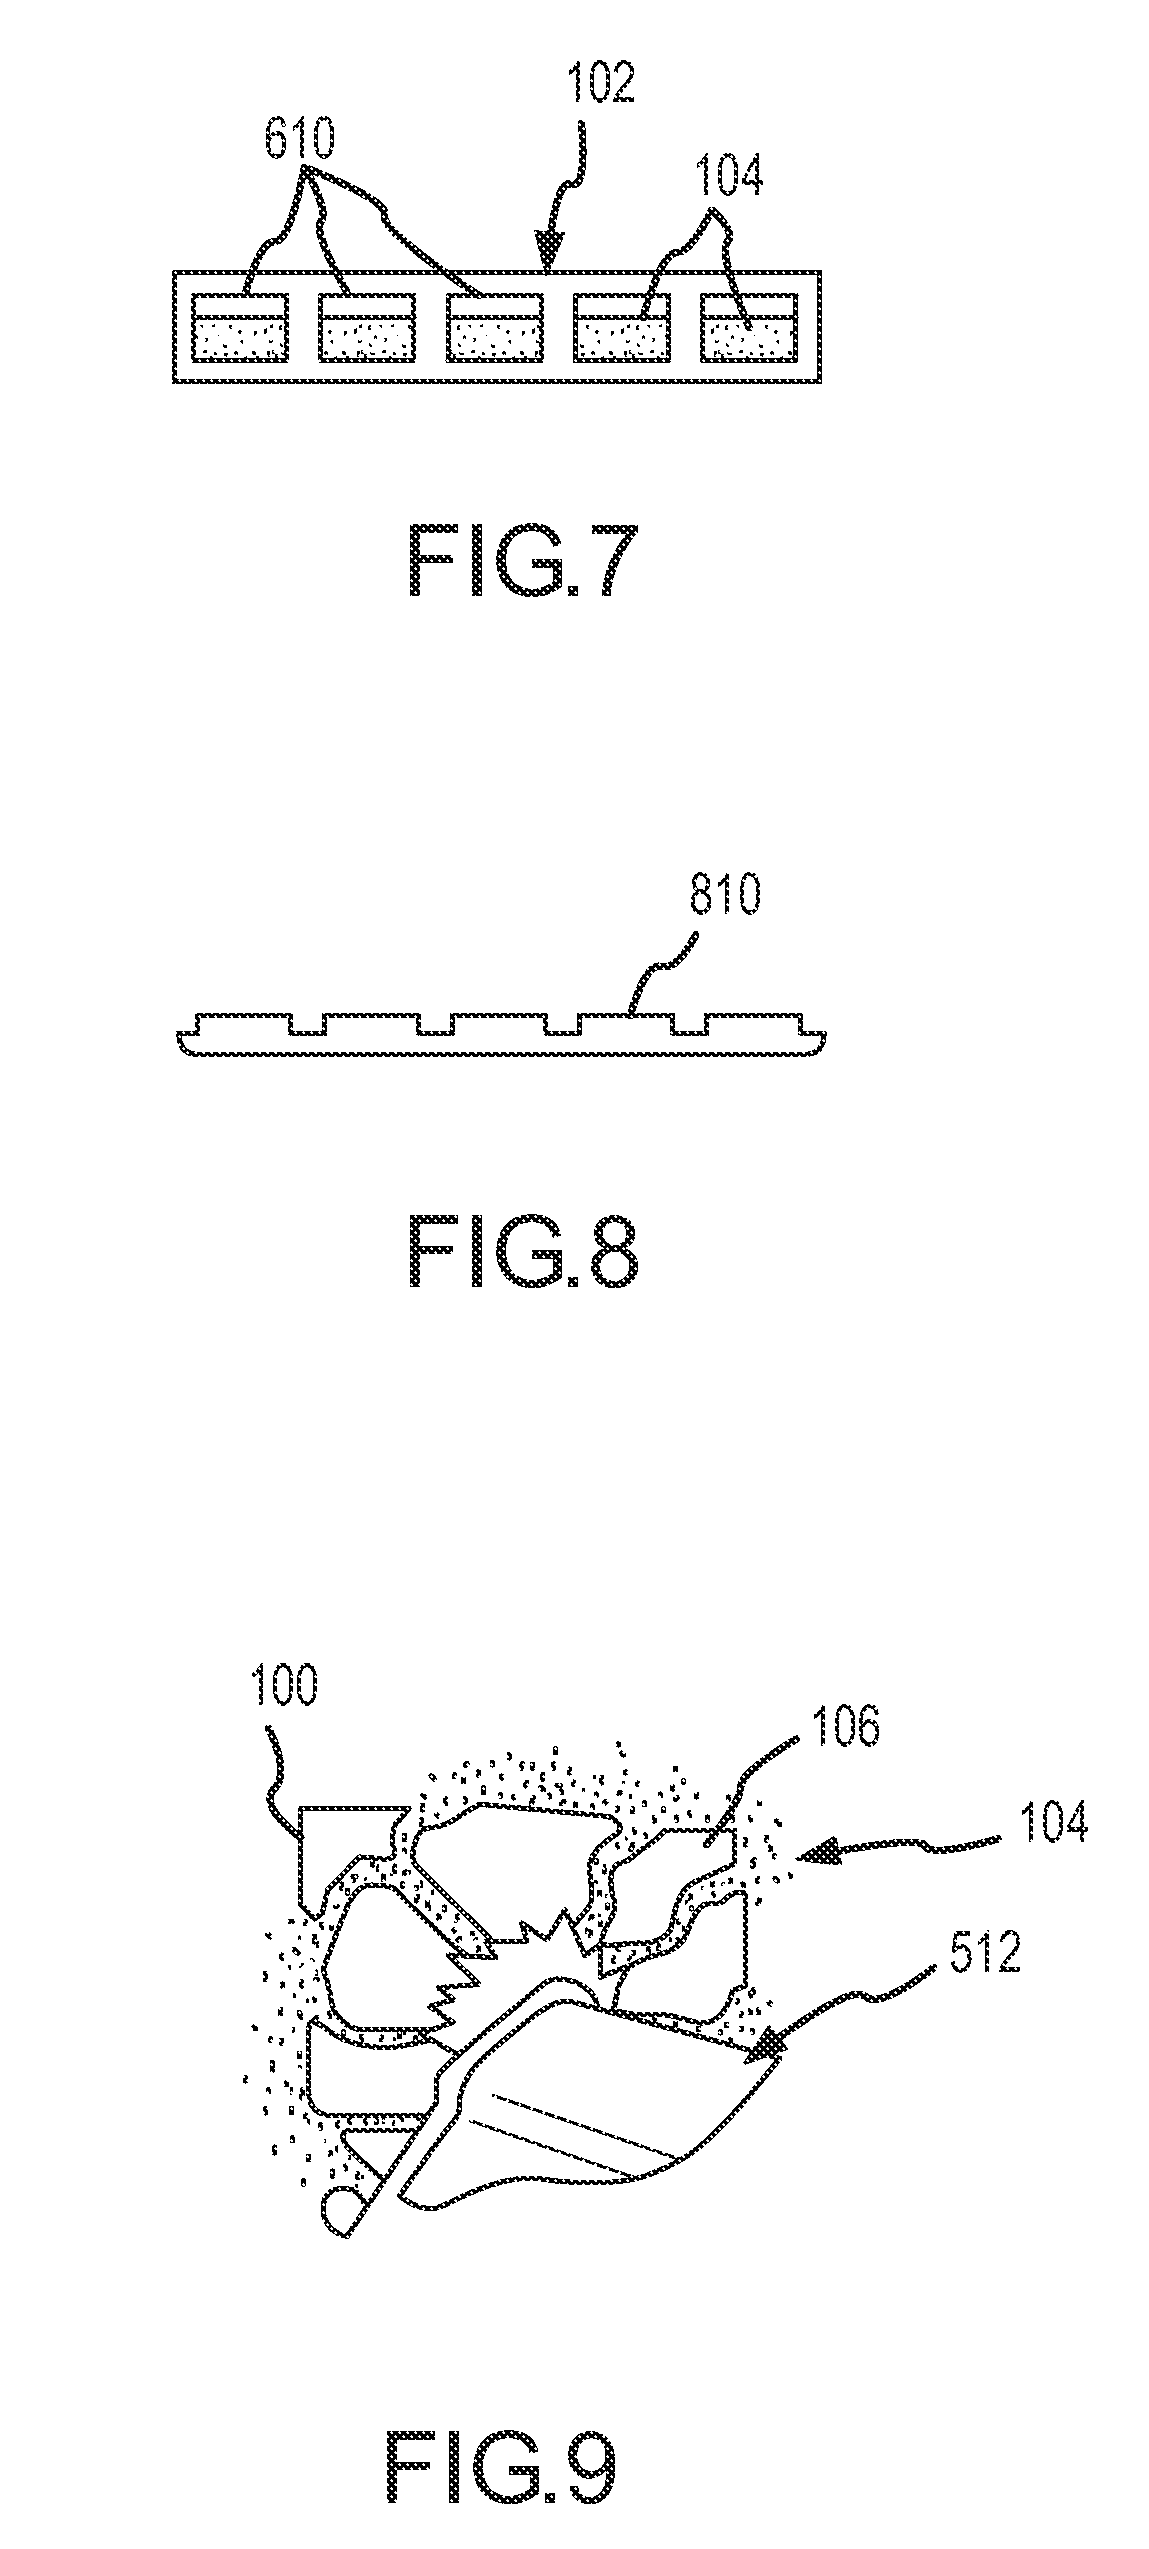 Methods and apparatus for controlling hazardous and/or flammable materials